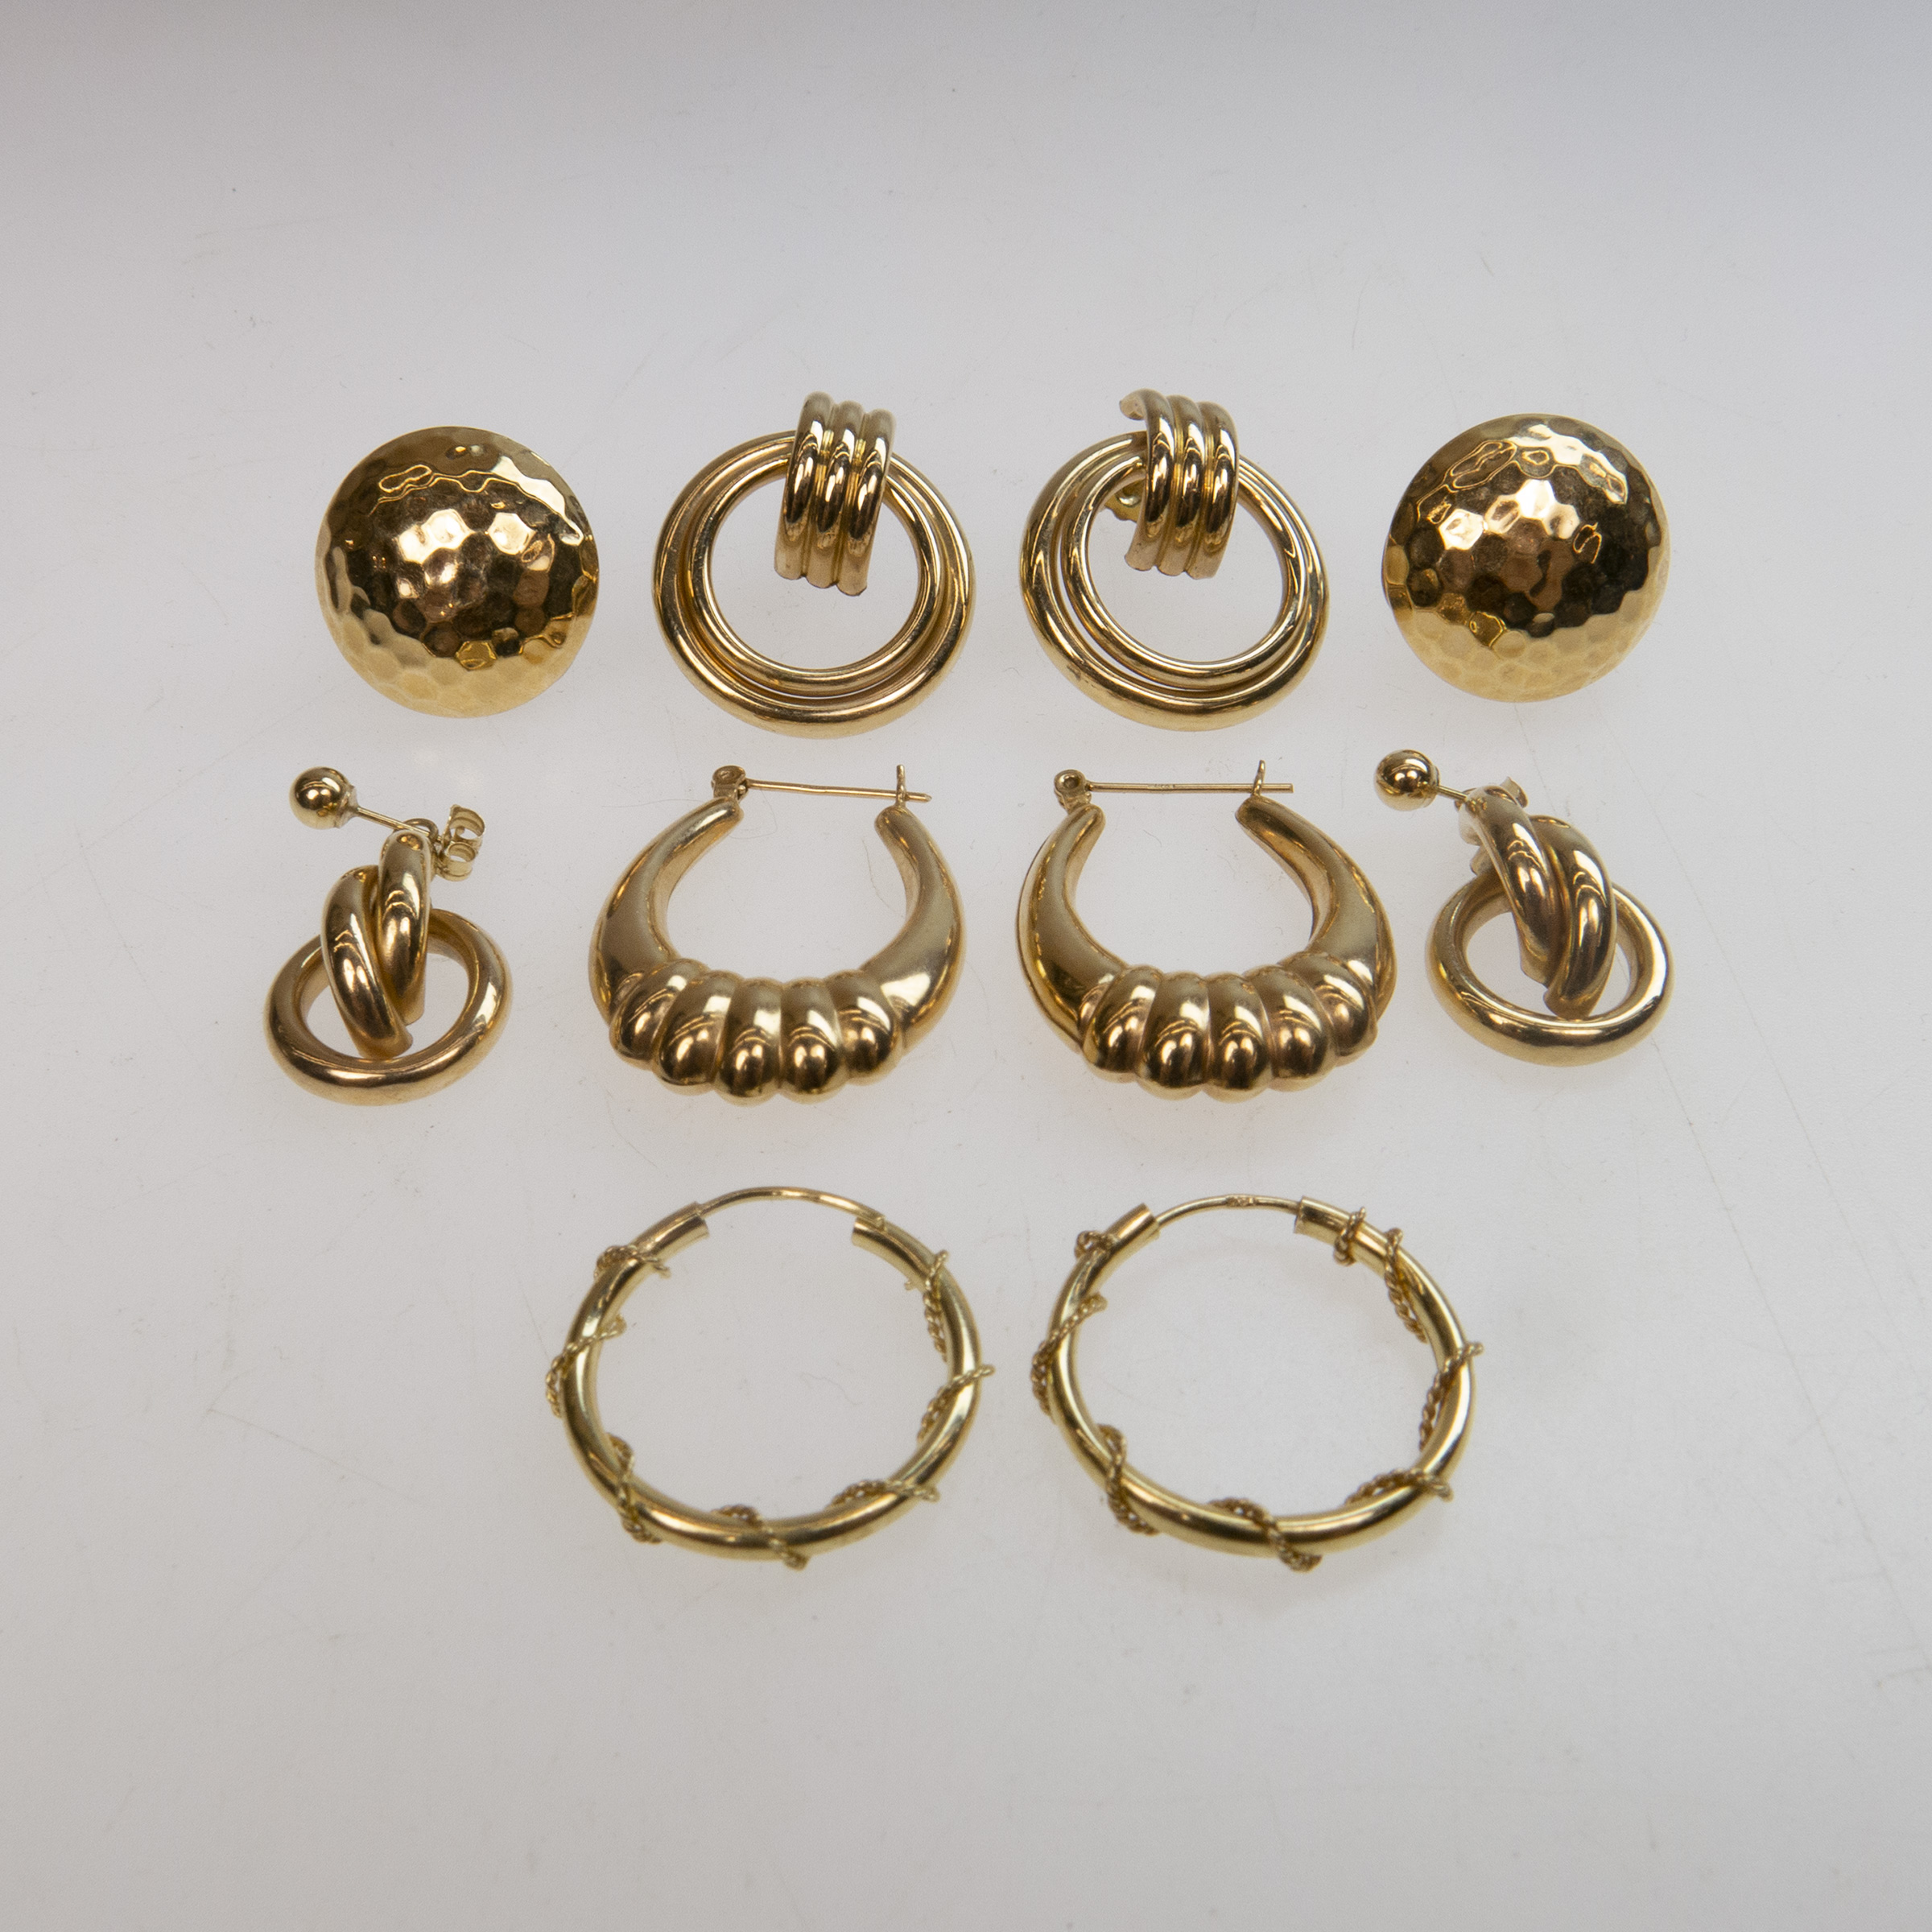 5 Pairs of 14k Yellow Gold Earrings